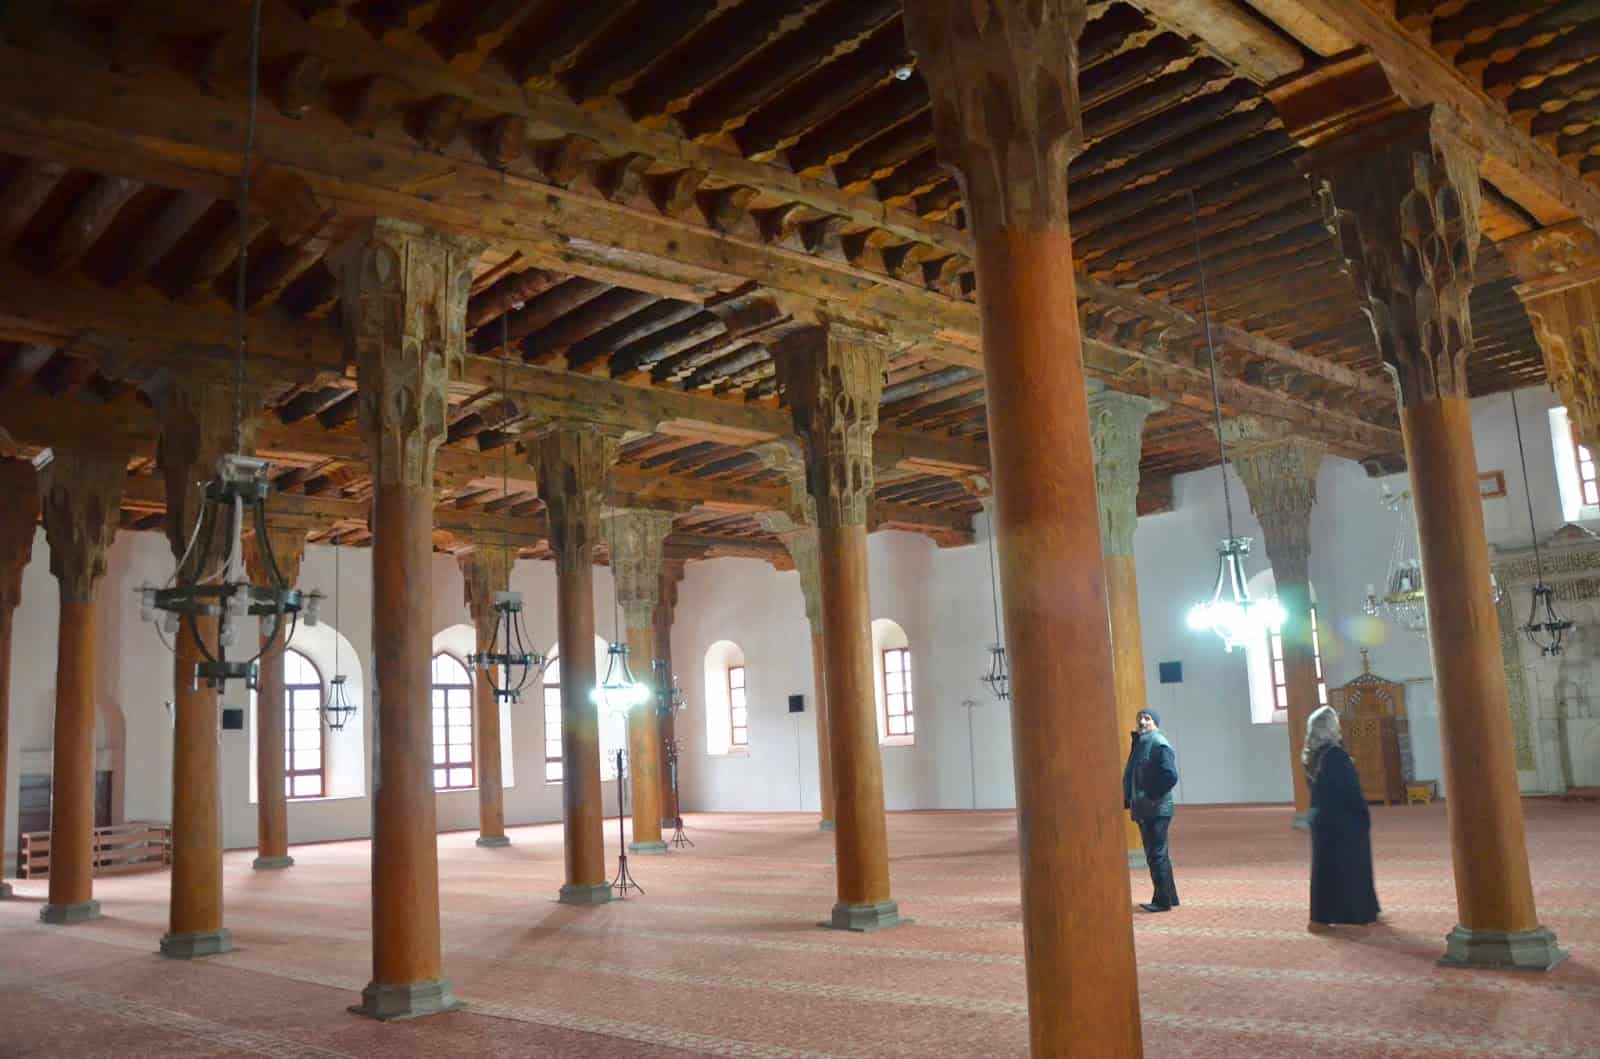 Prayer hall of the Great Mosque in Afyon, Turkey